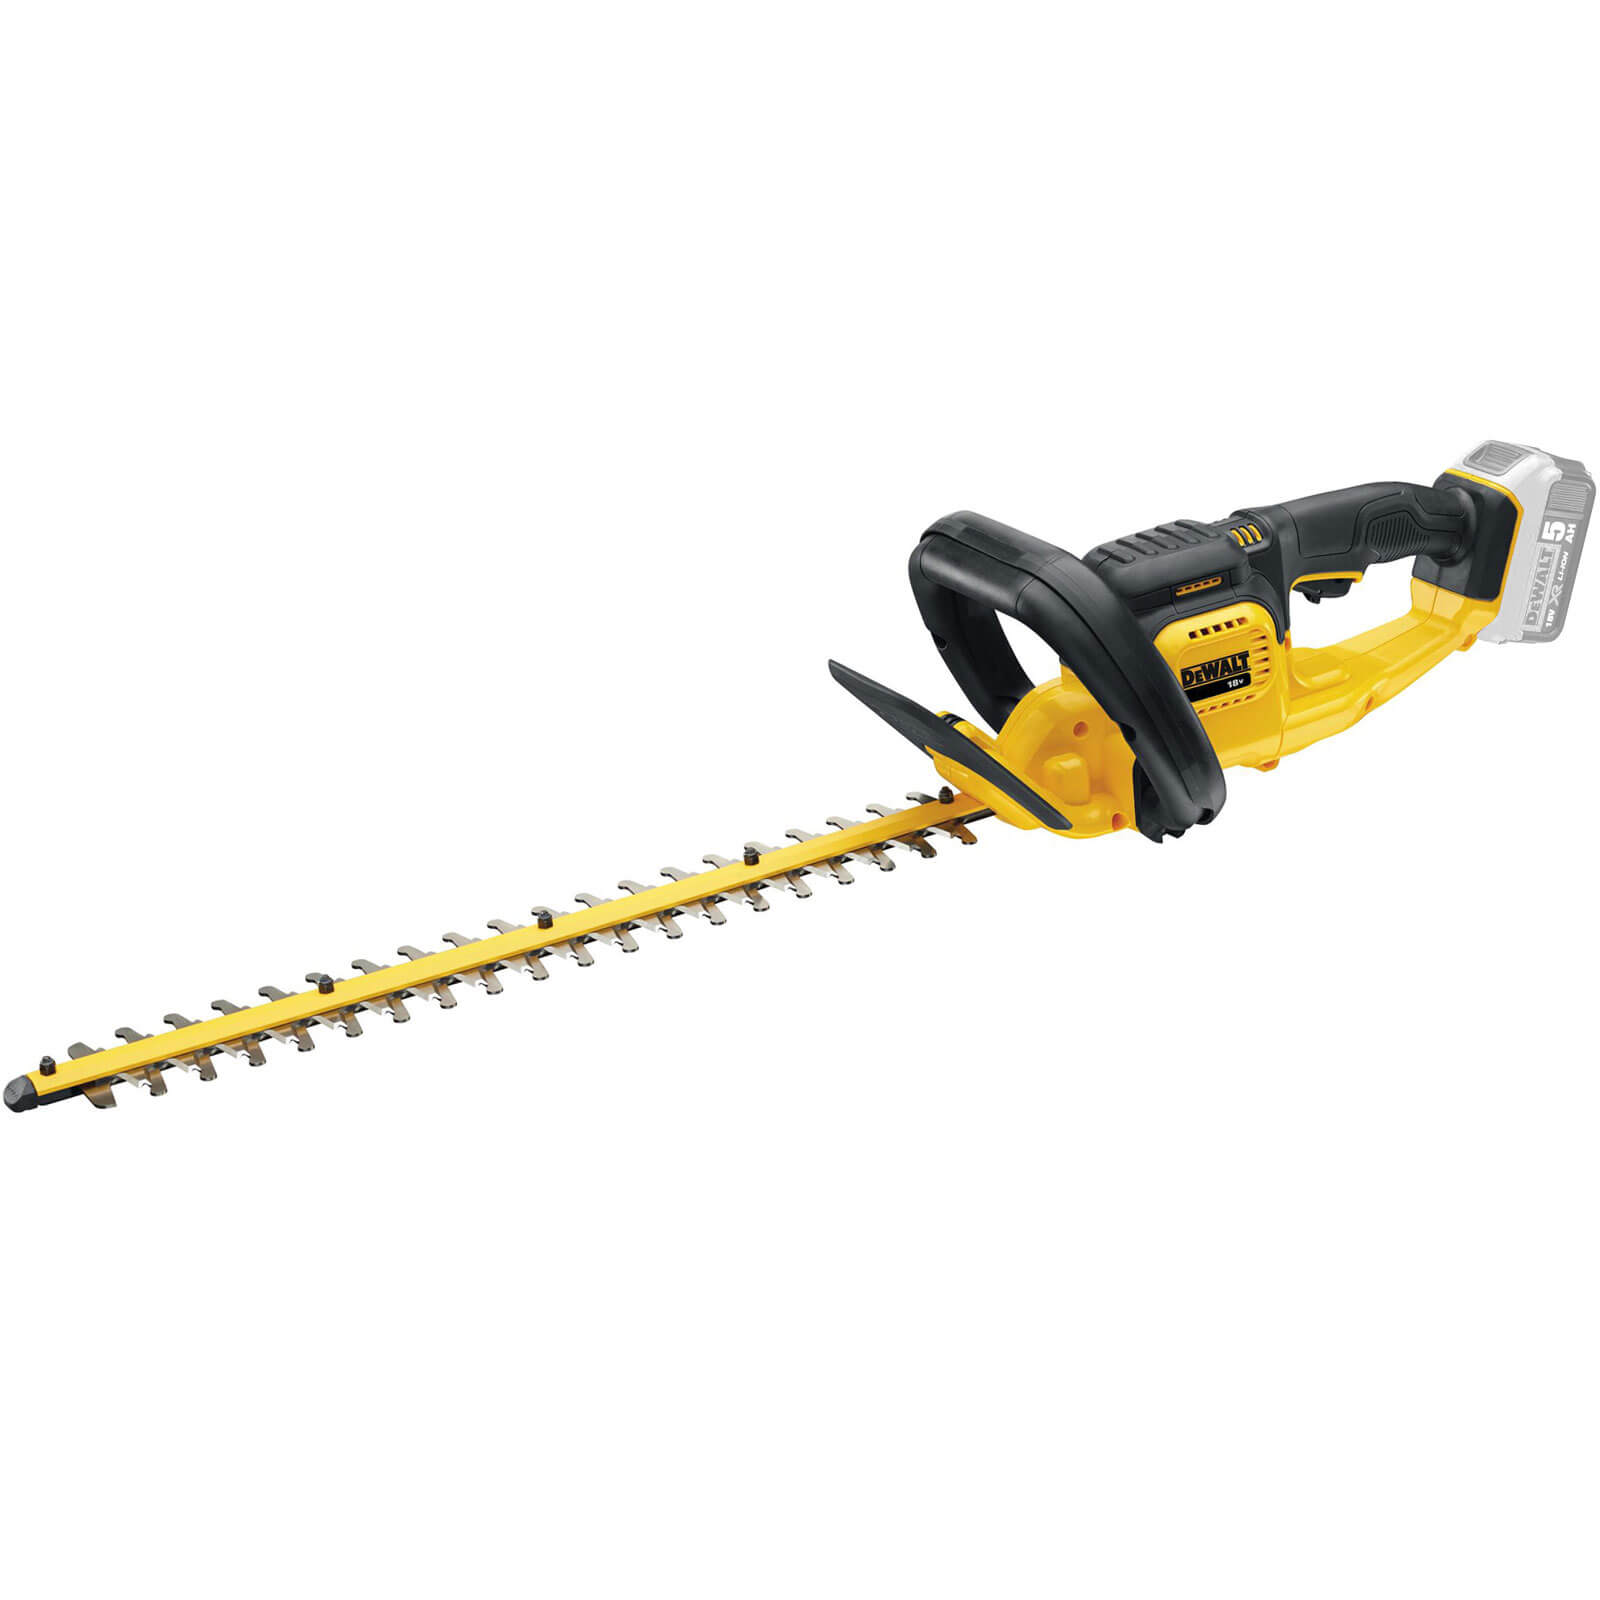 Wickes hedge trimmer